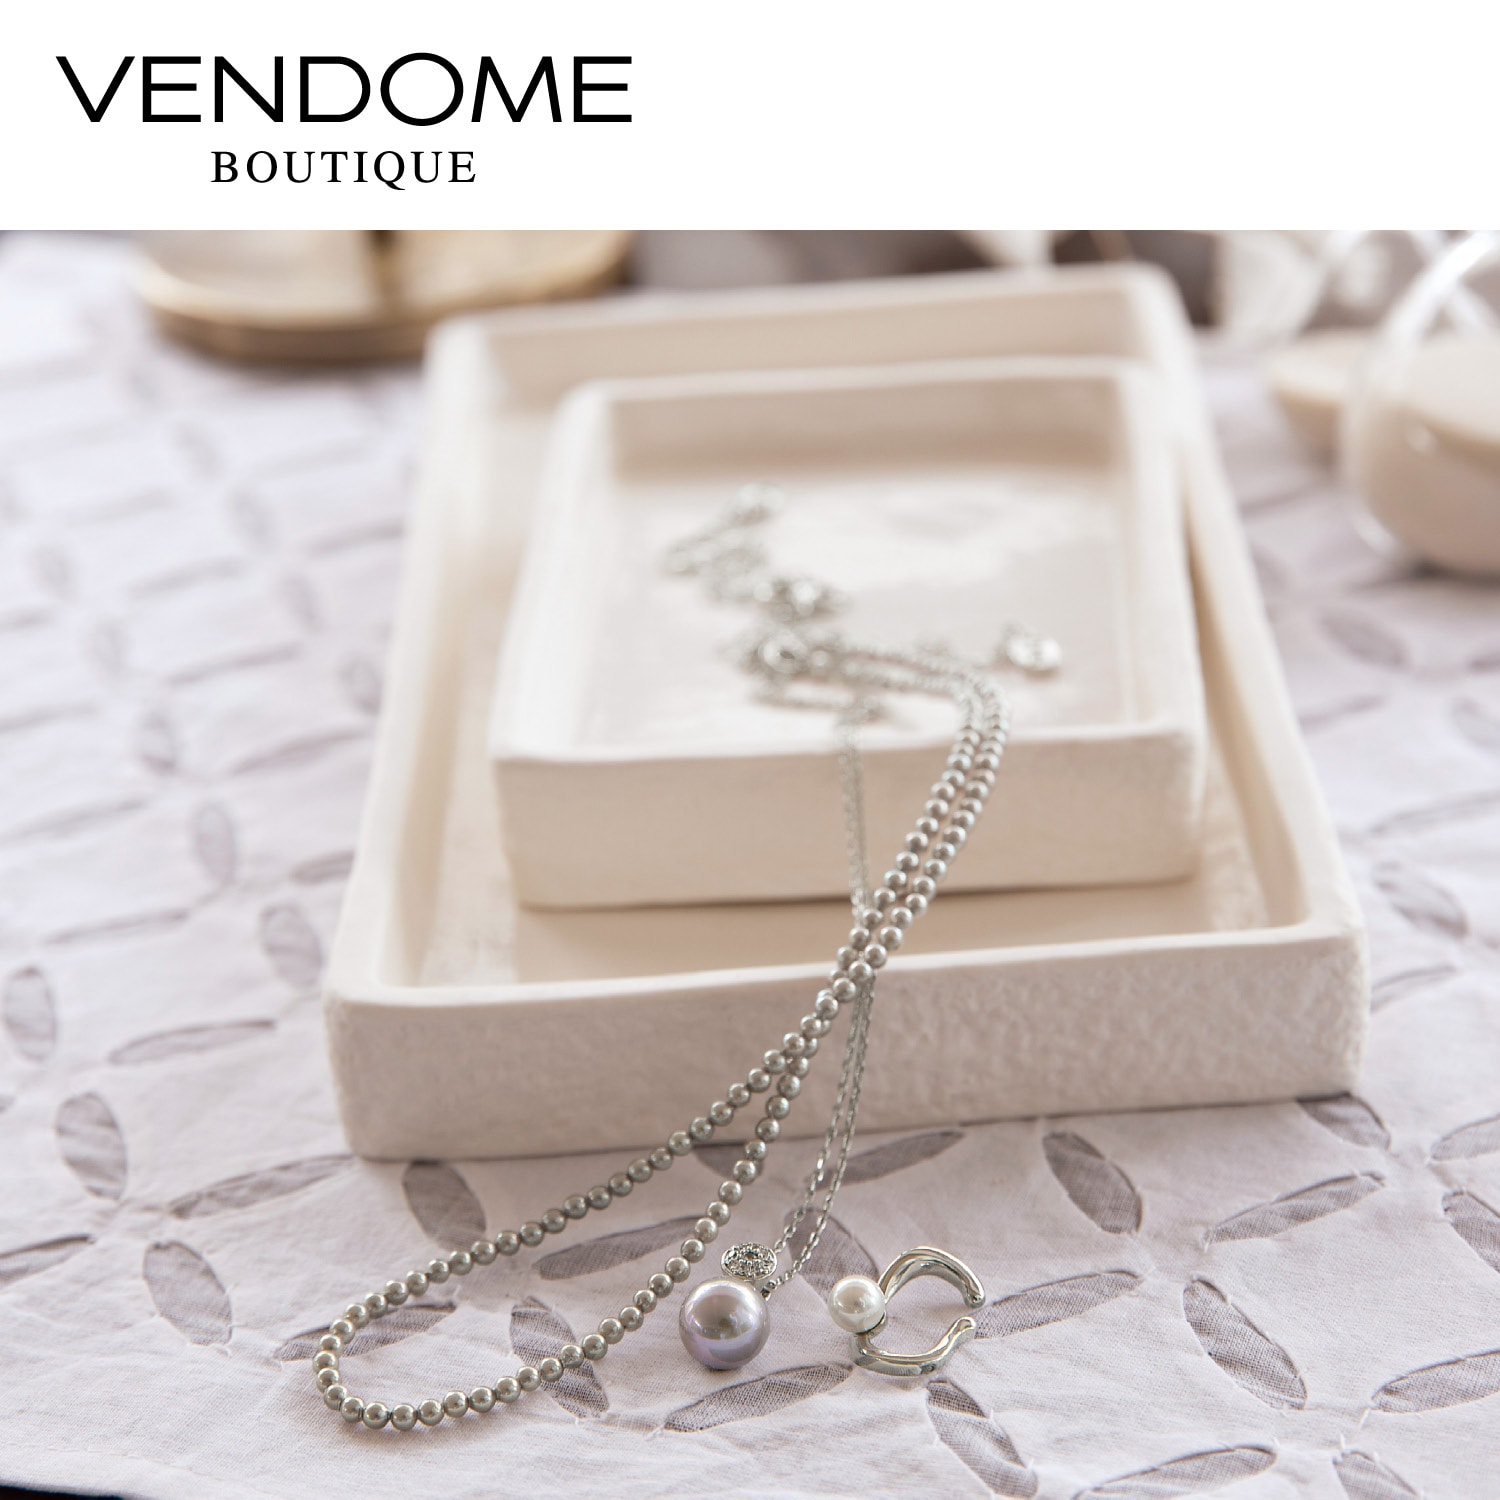 VENDOME BOUTIQUEネックレス、三点セット